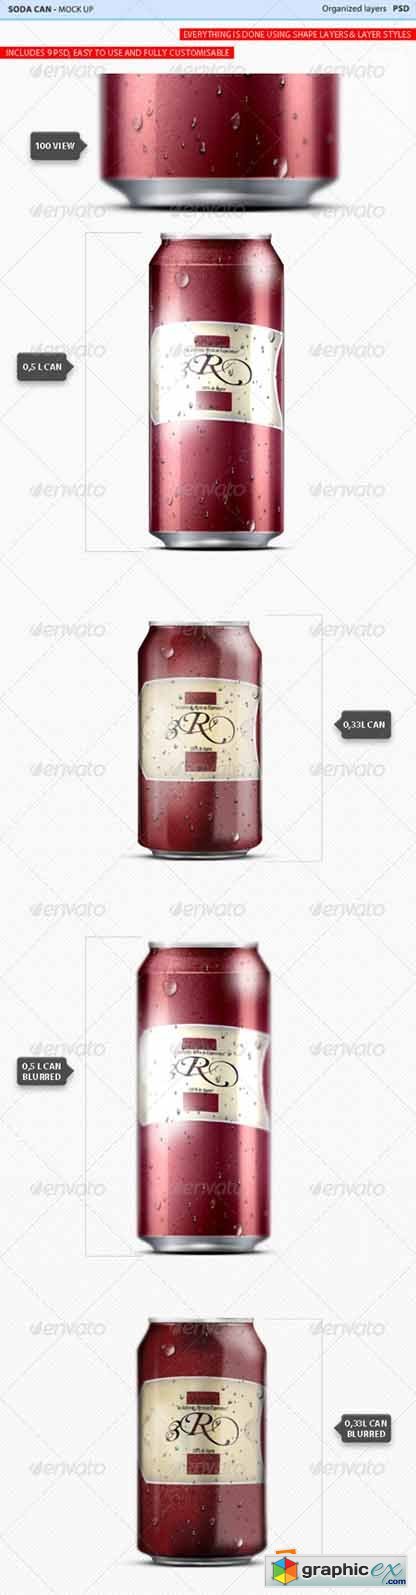 Soda Can Mock Up #1 805293